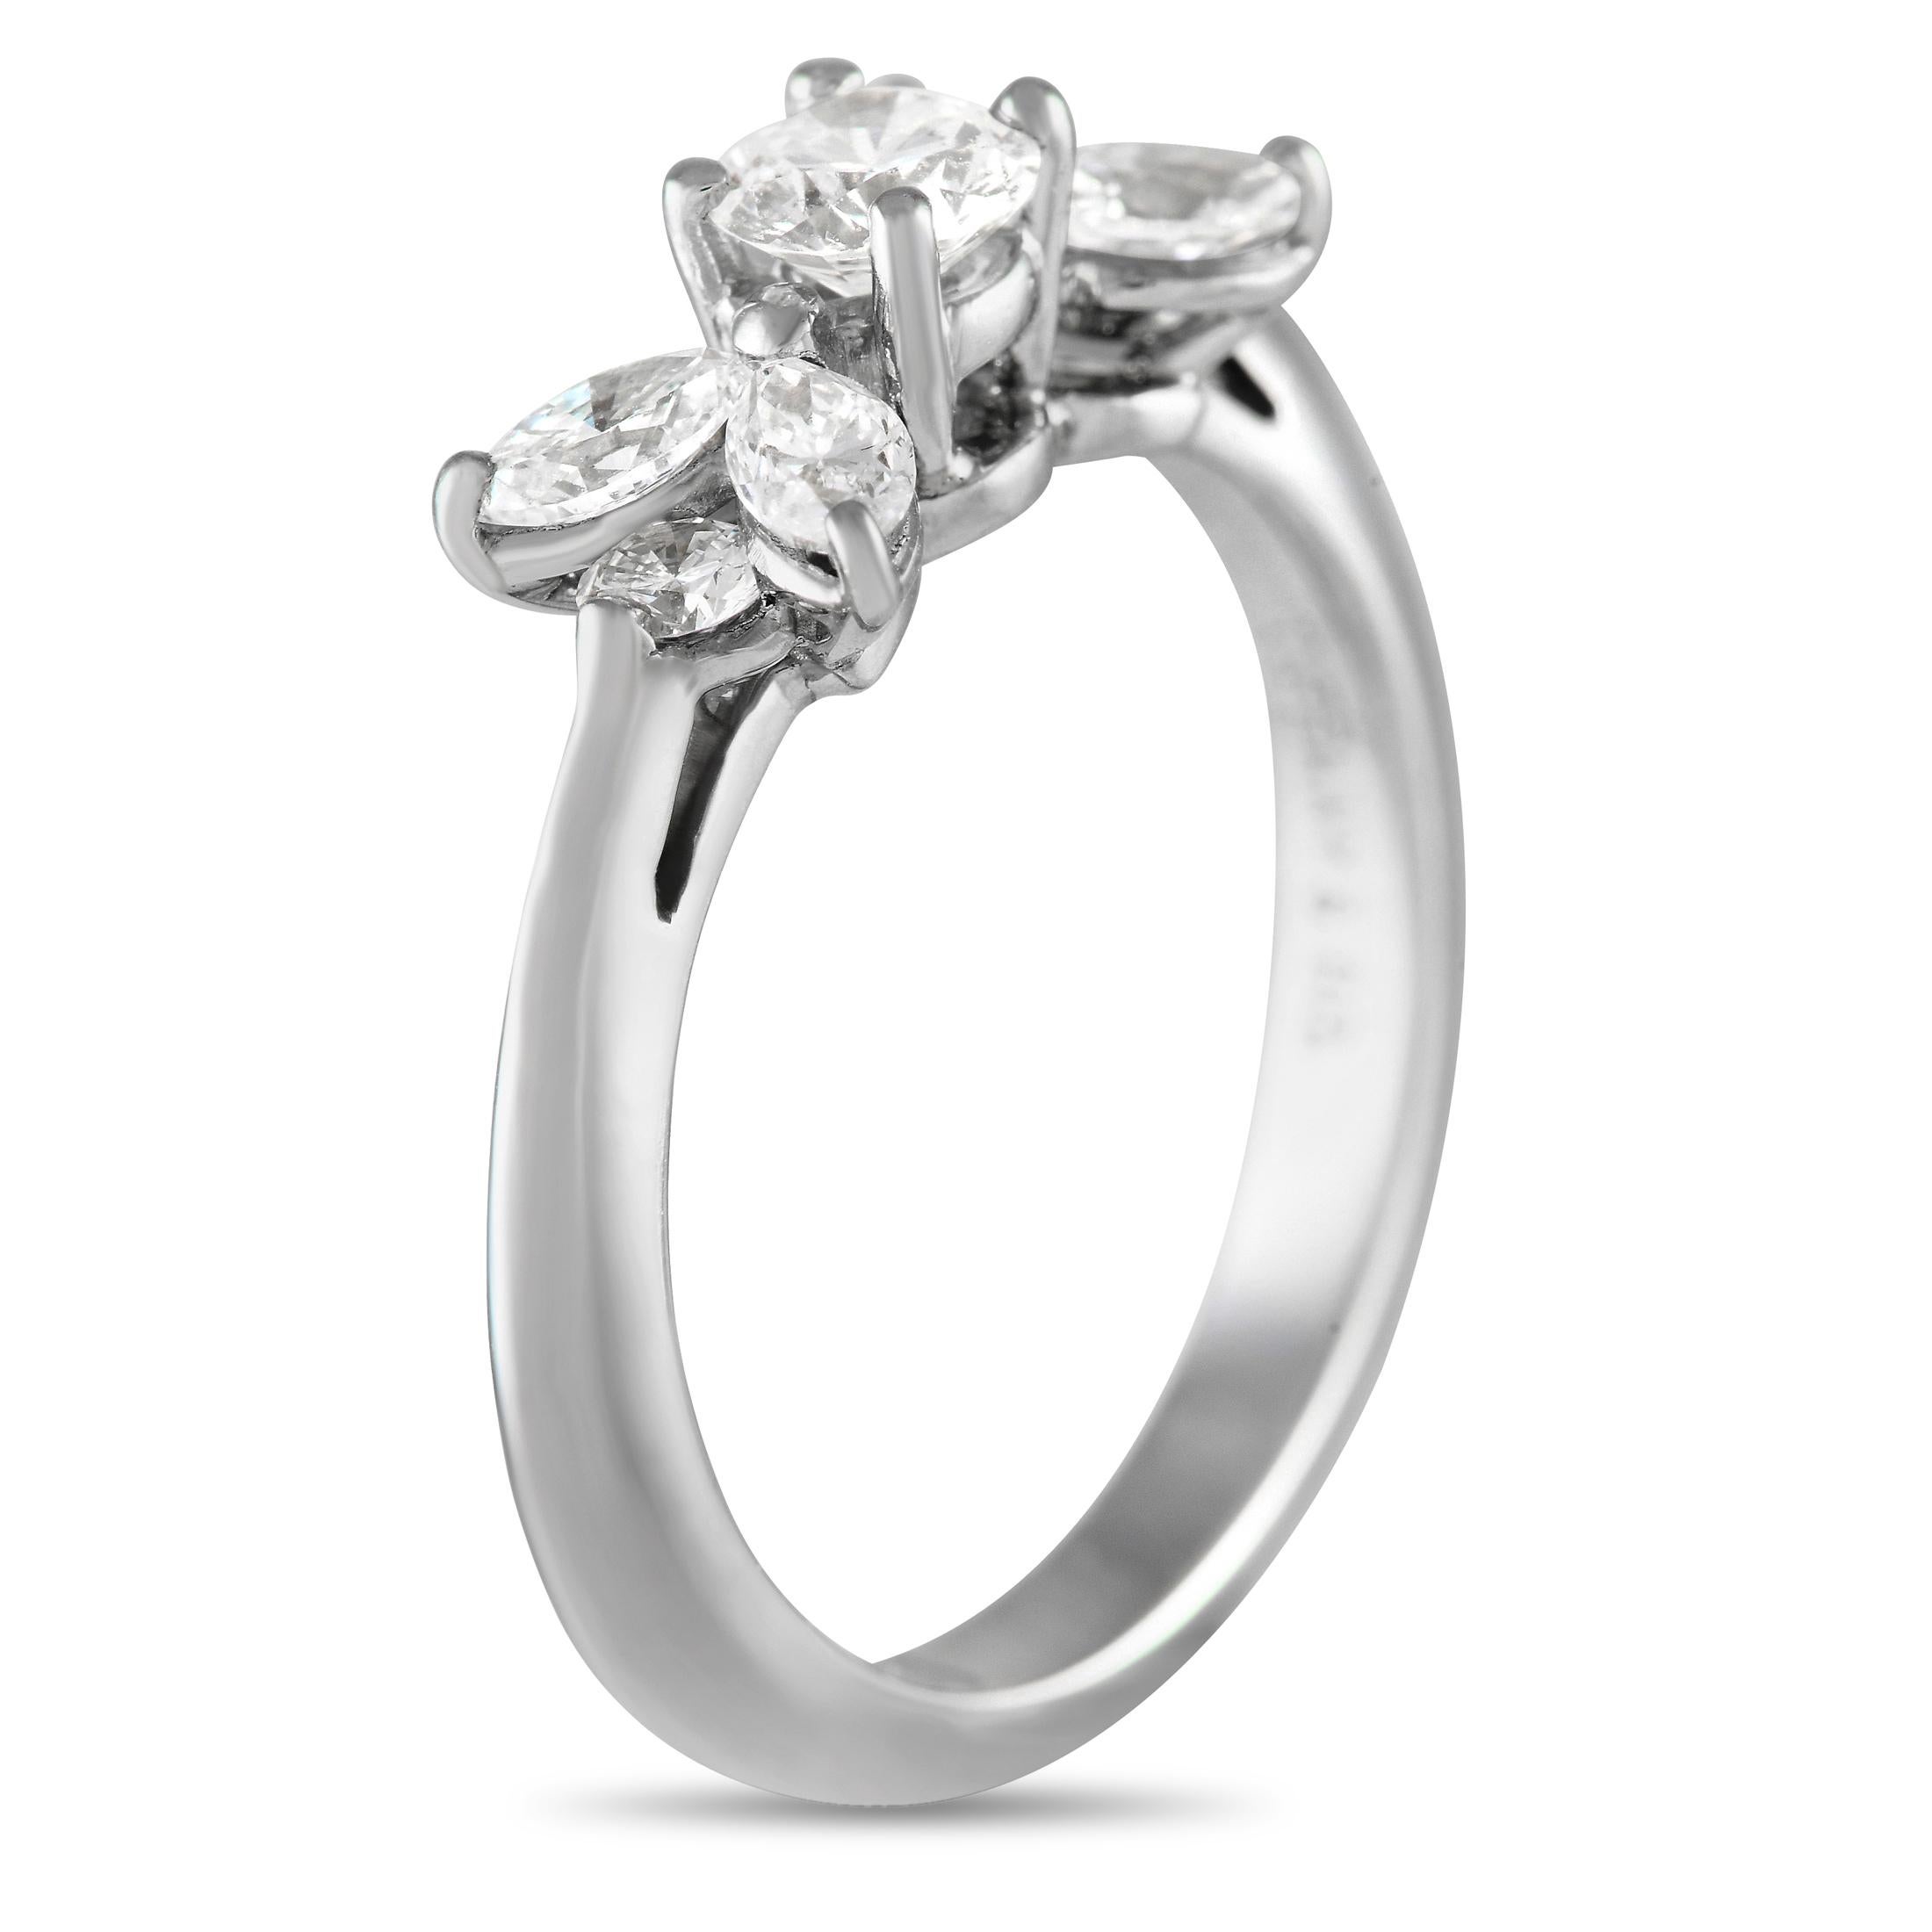 Exuding timeless elegance, this ring's beauty can certainly withstand trends. The ring is made out of 950 platinum and features a slender knife-edge shank. Sitting right on top of the central basket is a round diamond. On its left and right sides